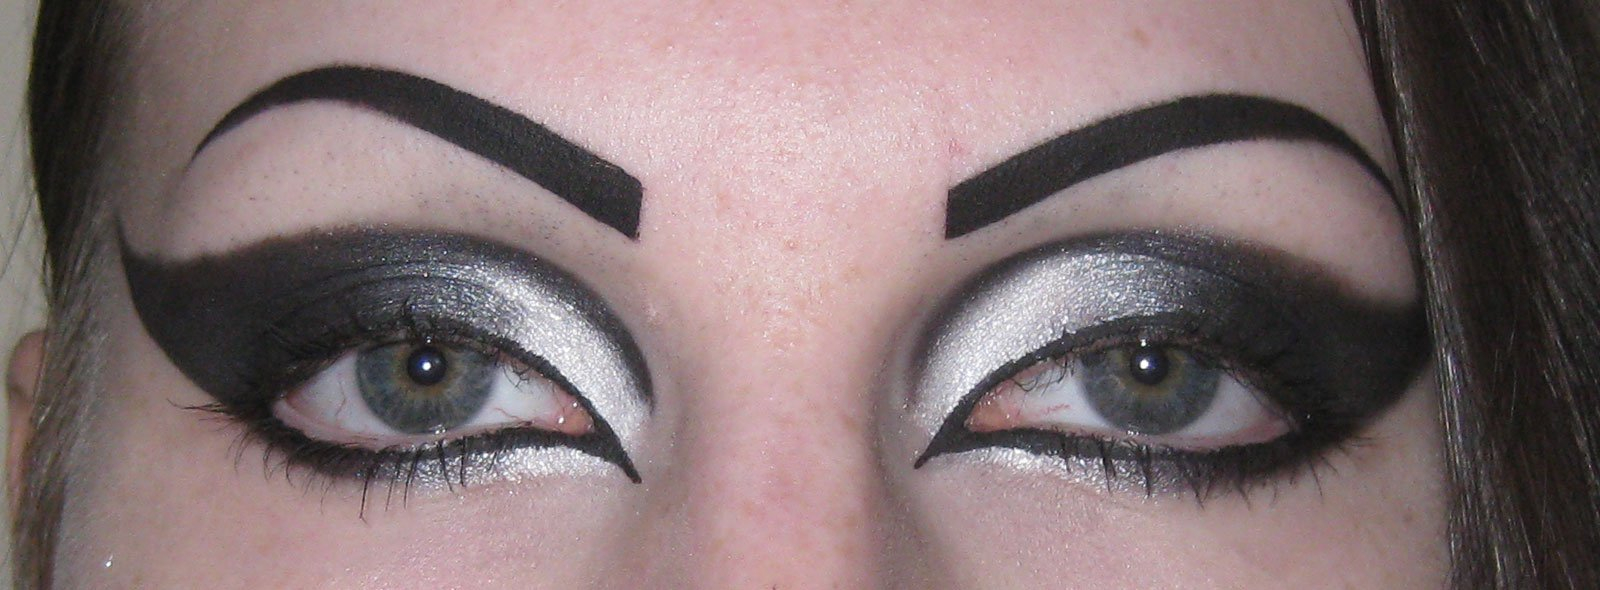 Cool Black Eye Makeup Dramatic Gothic White To Black Extended Winged Cat Eye Makeup